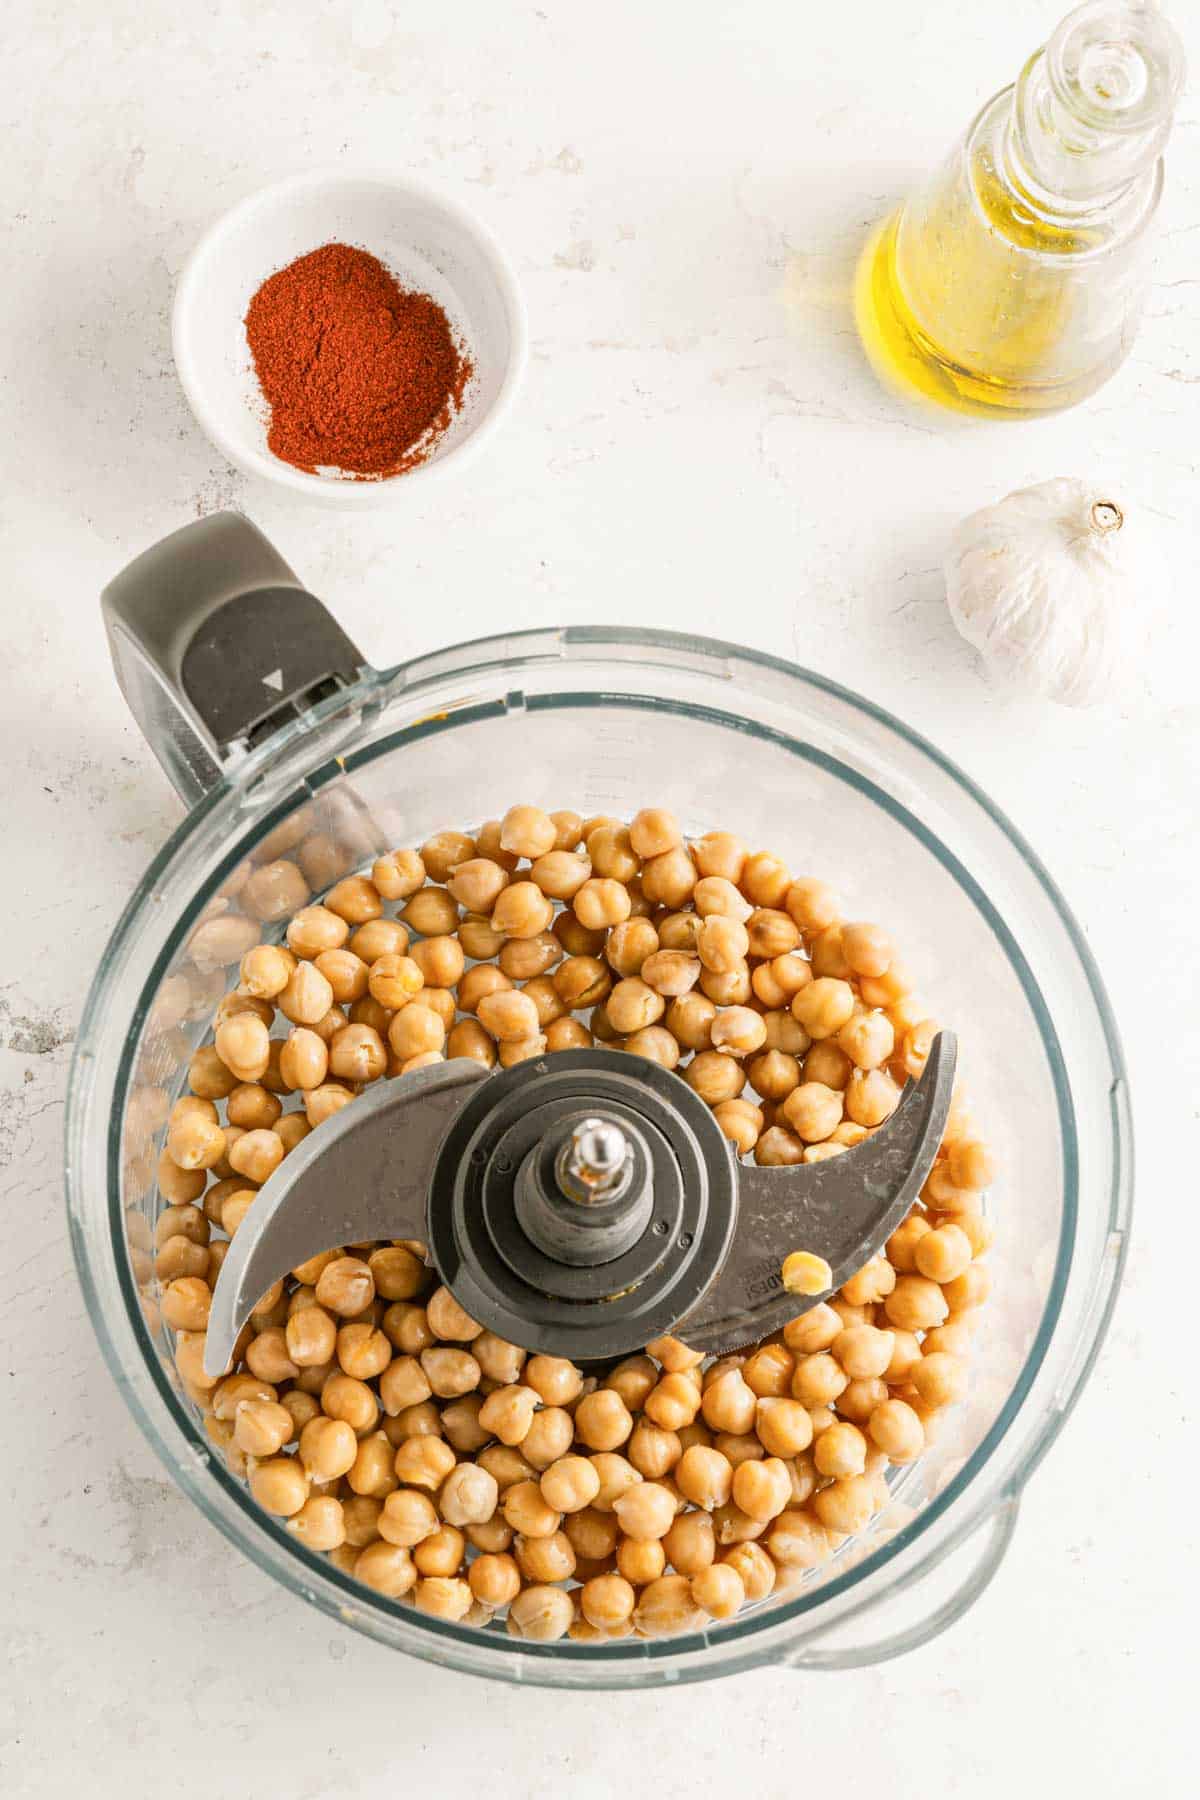 Chickpeas and roasted red peppers in a food processor.